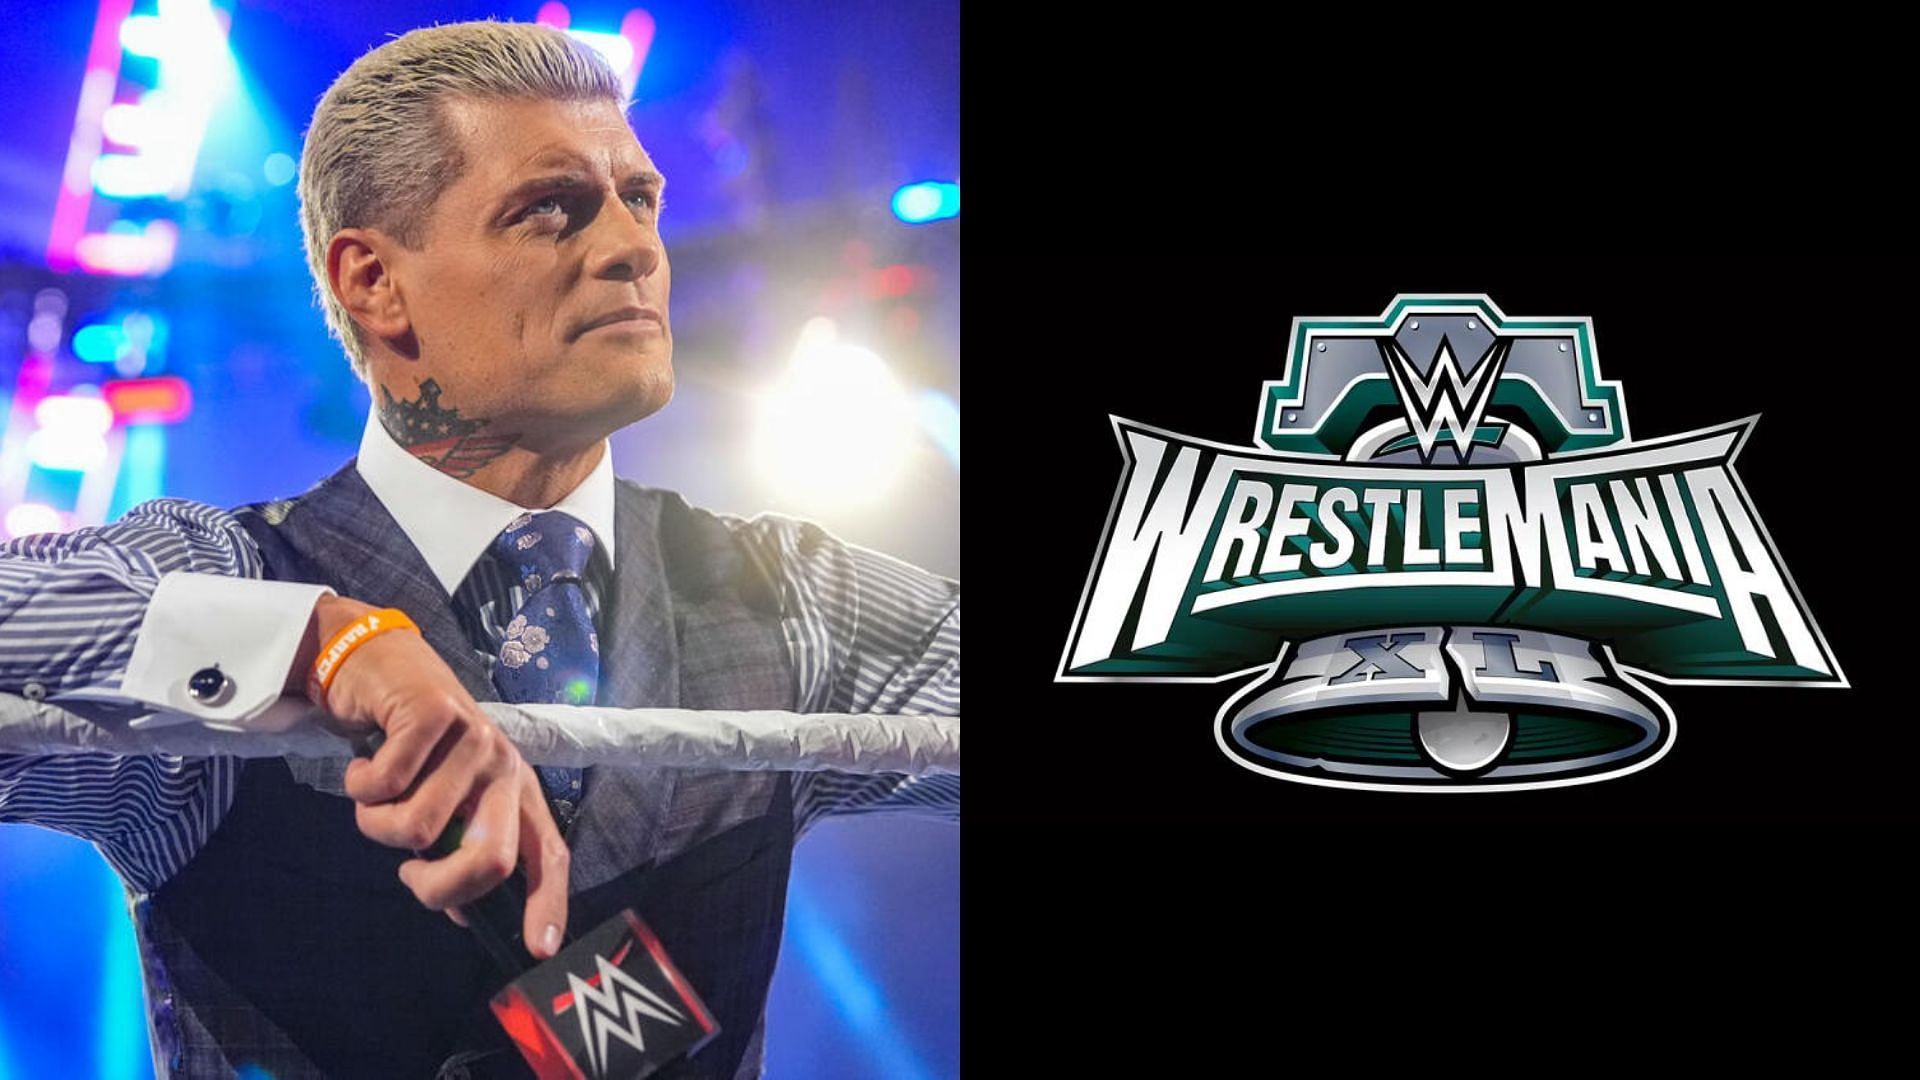 Cody Rhodes will main event WrestleMania this year [Photo courtesy of WWE